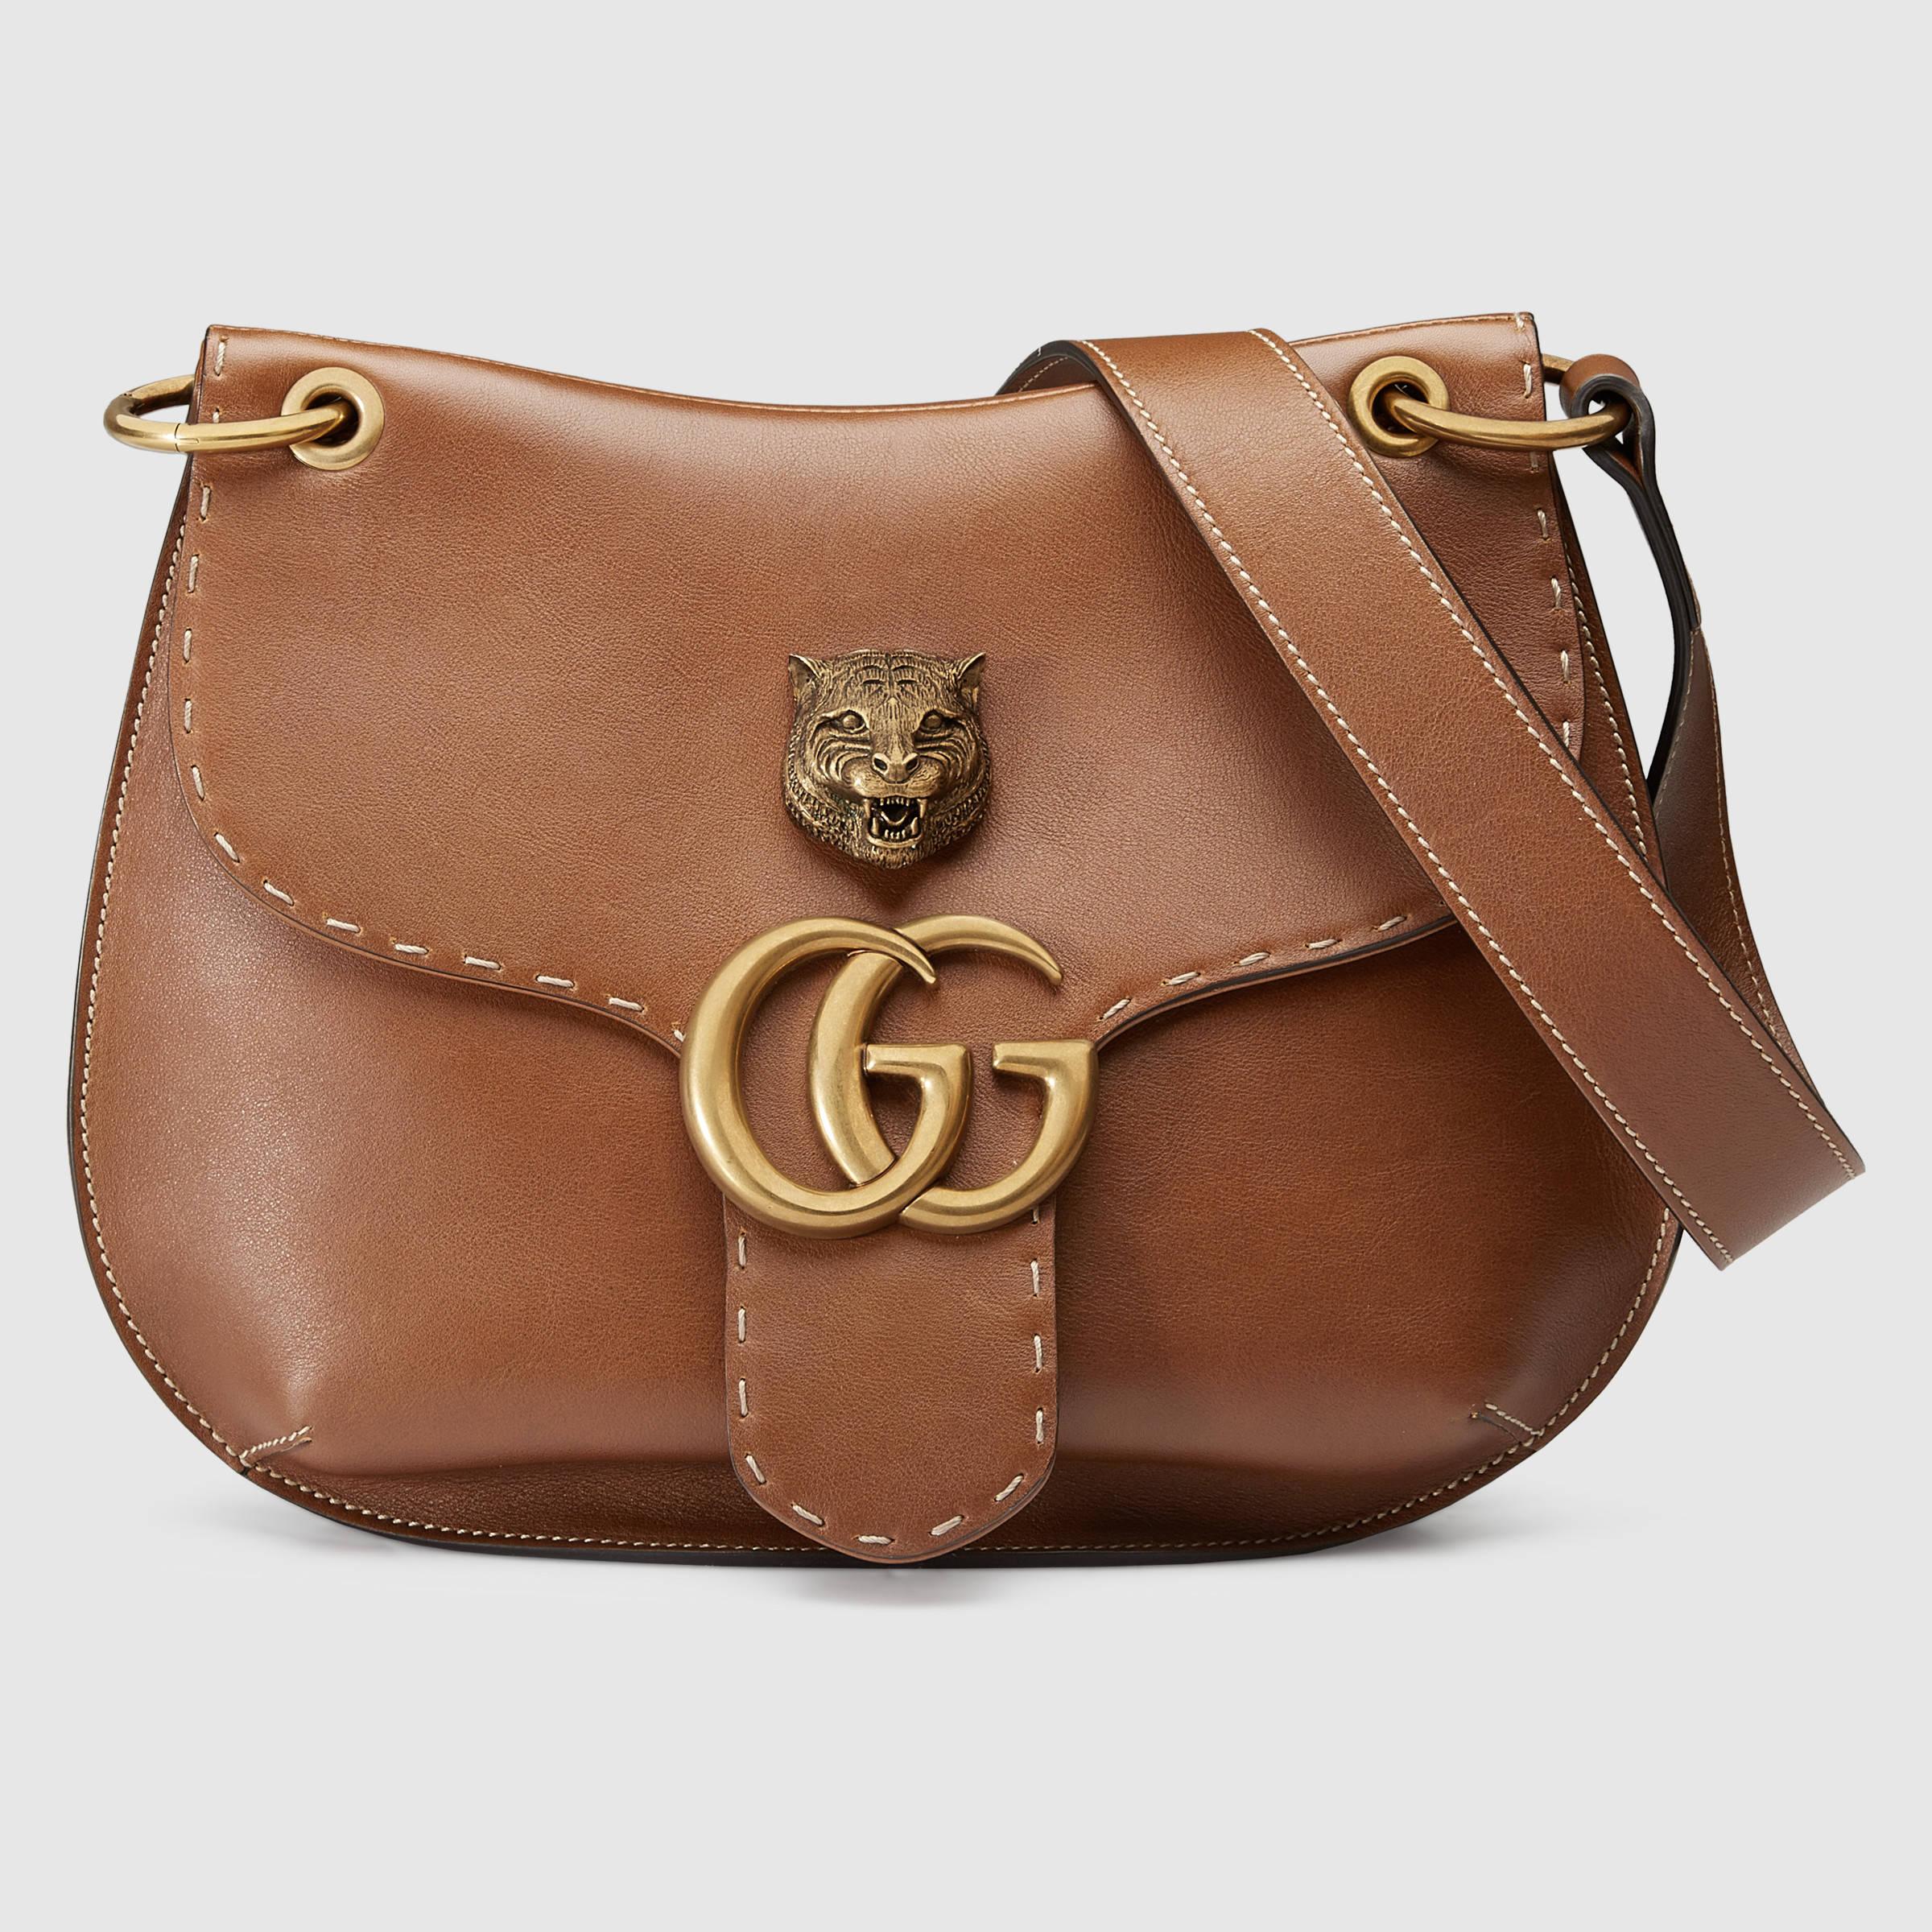 Lyst - Gucci GG Marmont Leather Shoulder Bag in Brown